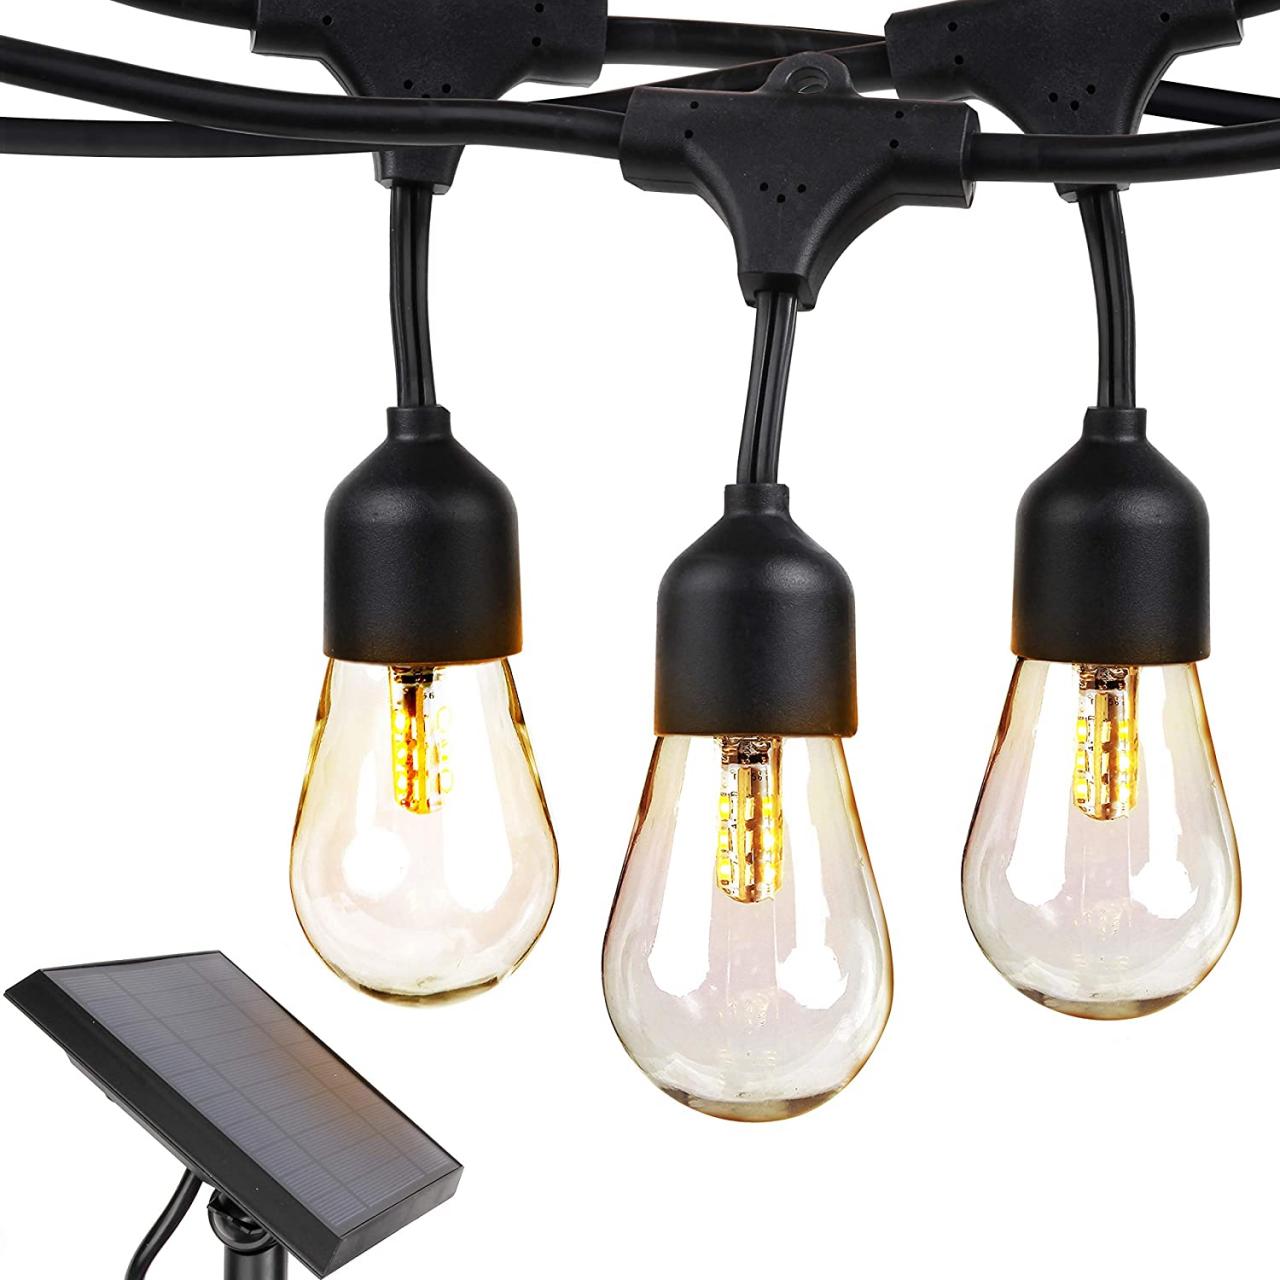 Buy Brightech Ambience Pro - Outdoor Edison String Lights - Dimmable  Vintage Filament Bulbs Create Old Time Bistro Ambience On Your Patio -  Commercial Grade Weatherproof - 48 Ft Market Lights Online in Hong Kong.  B010MOFFGM